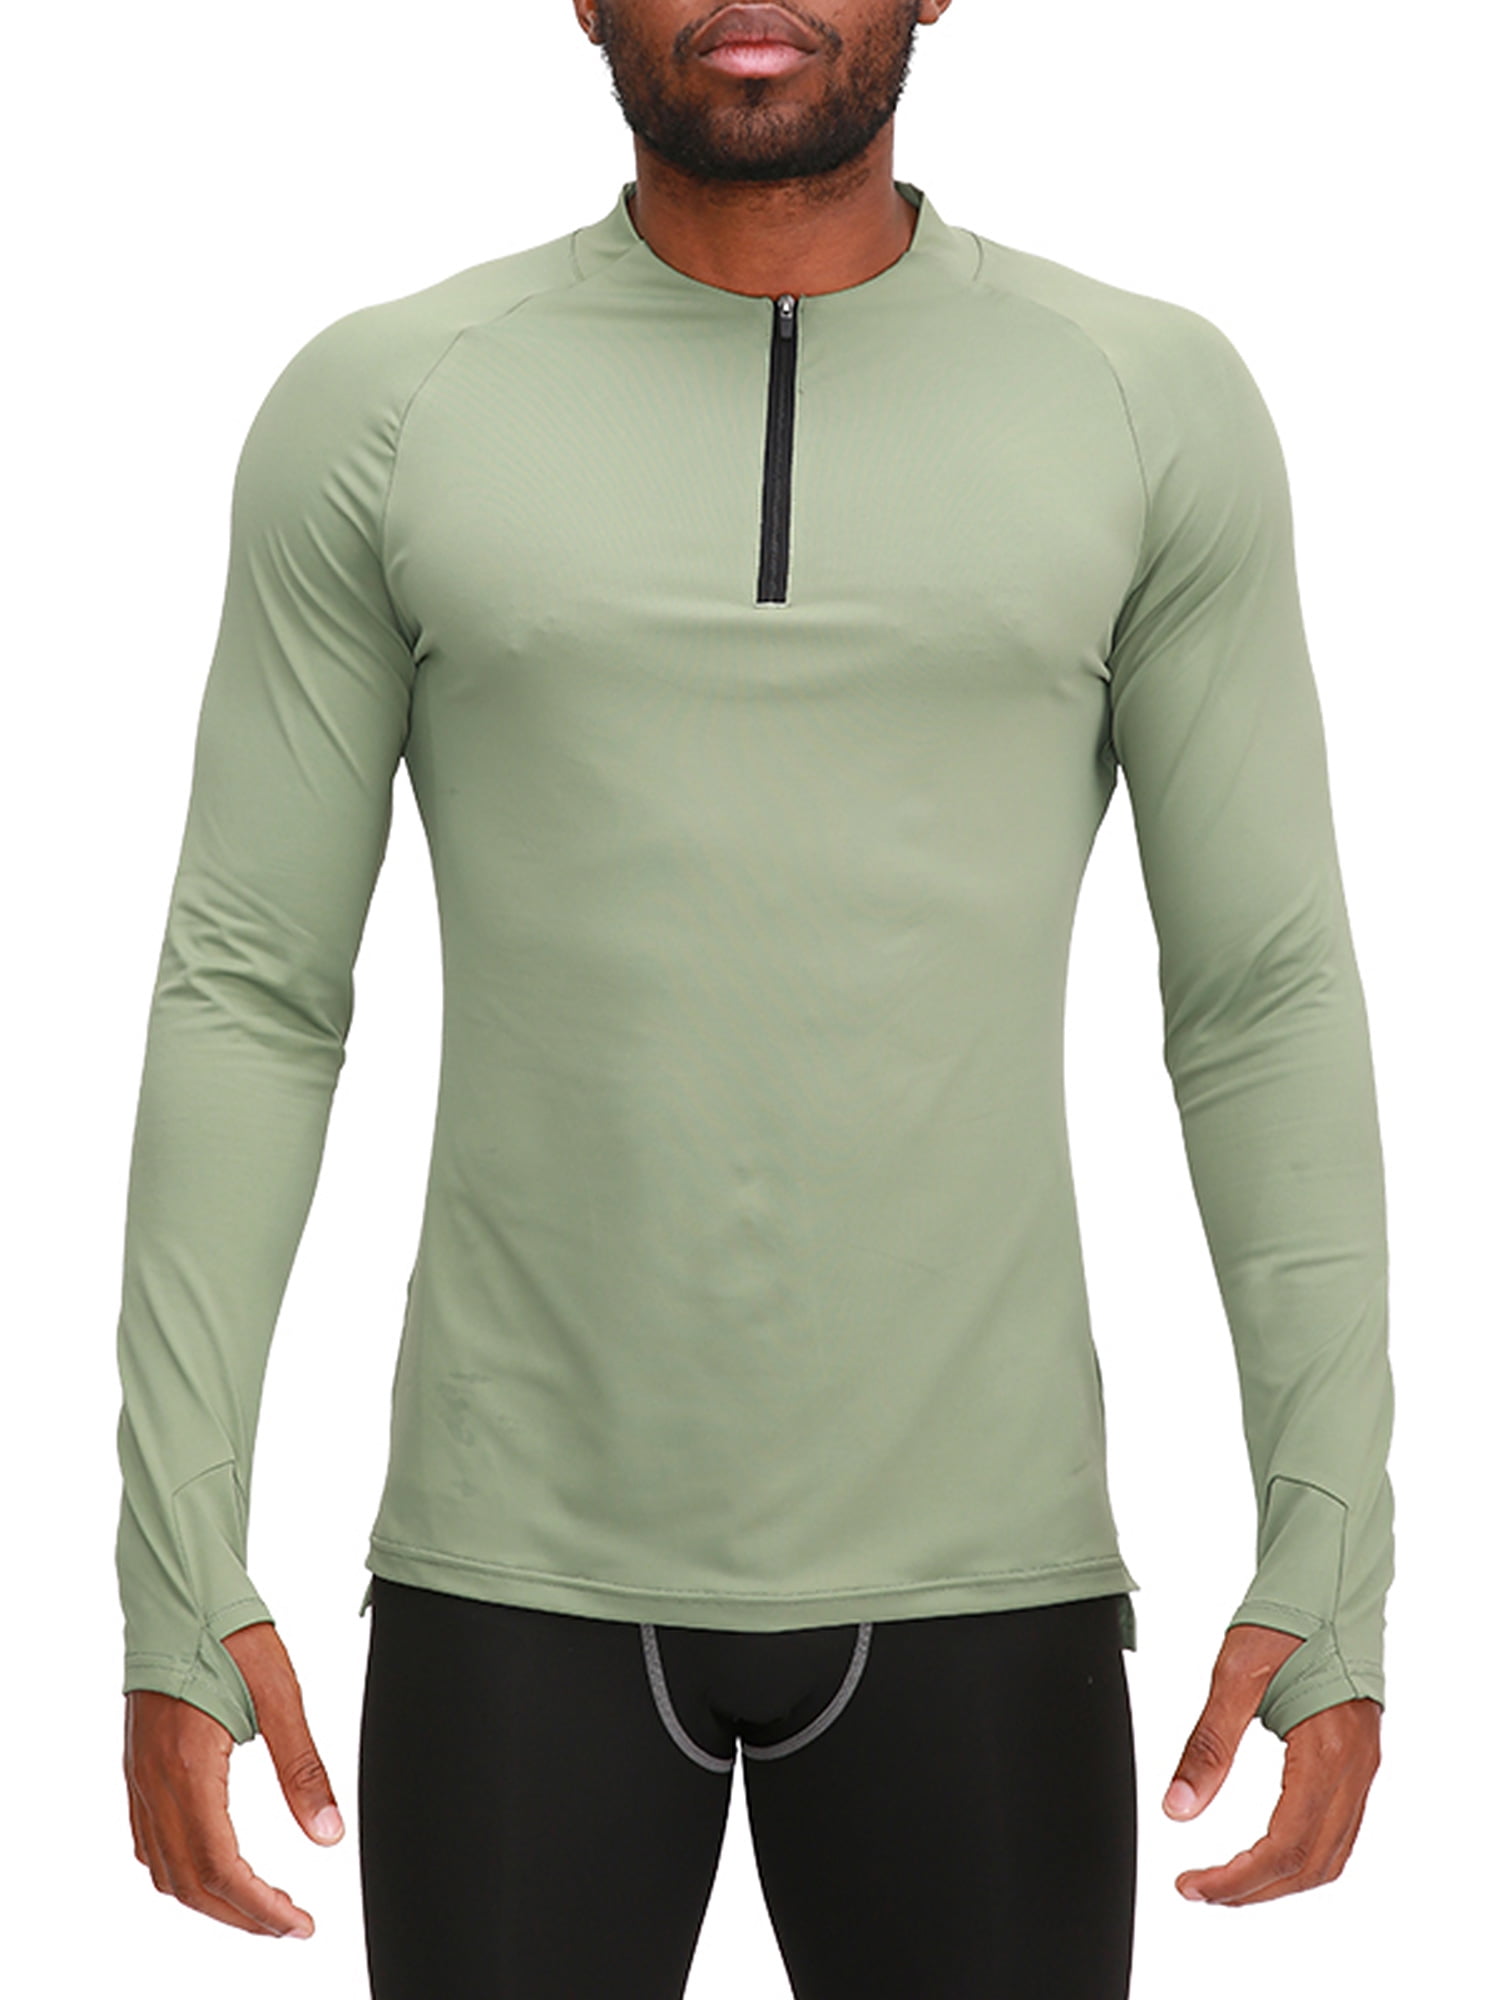 Mens Compression Tops Athletic Running Training Gym T-shirts Slim fit Base Layer 